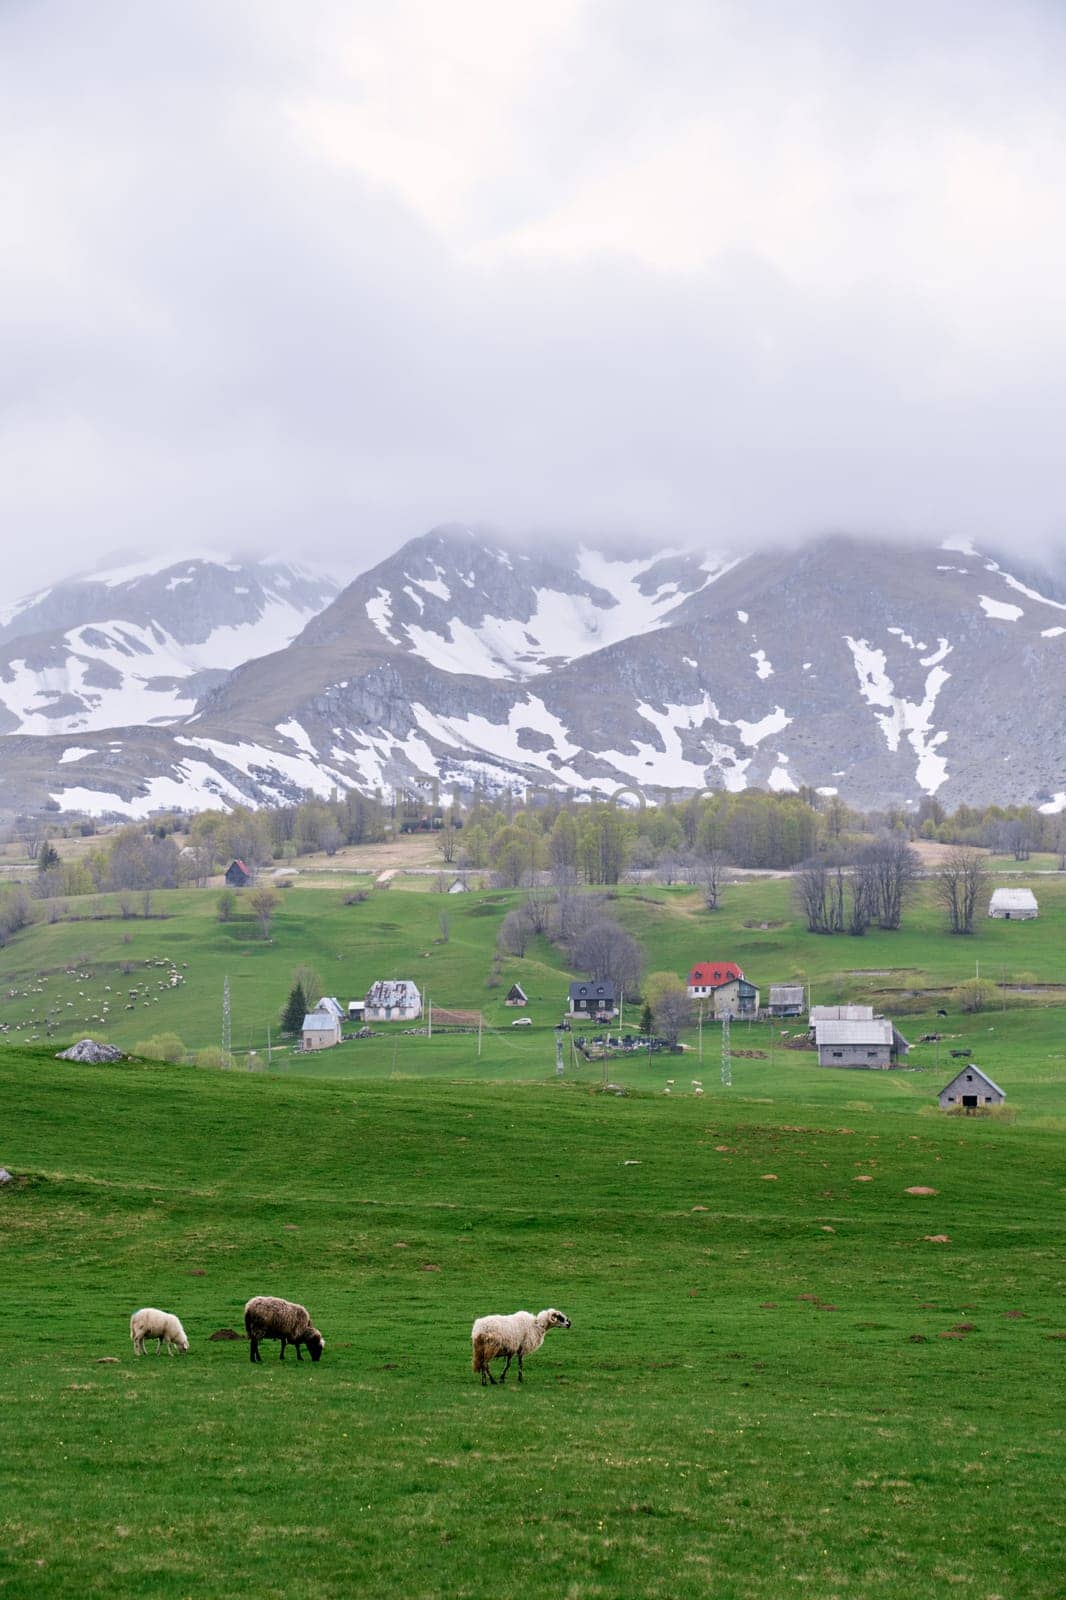 Sheep walk through a green pasture near a village in a valley of snowy mountains by Nadtochiy